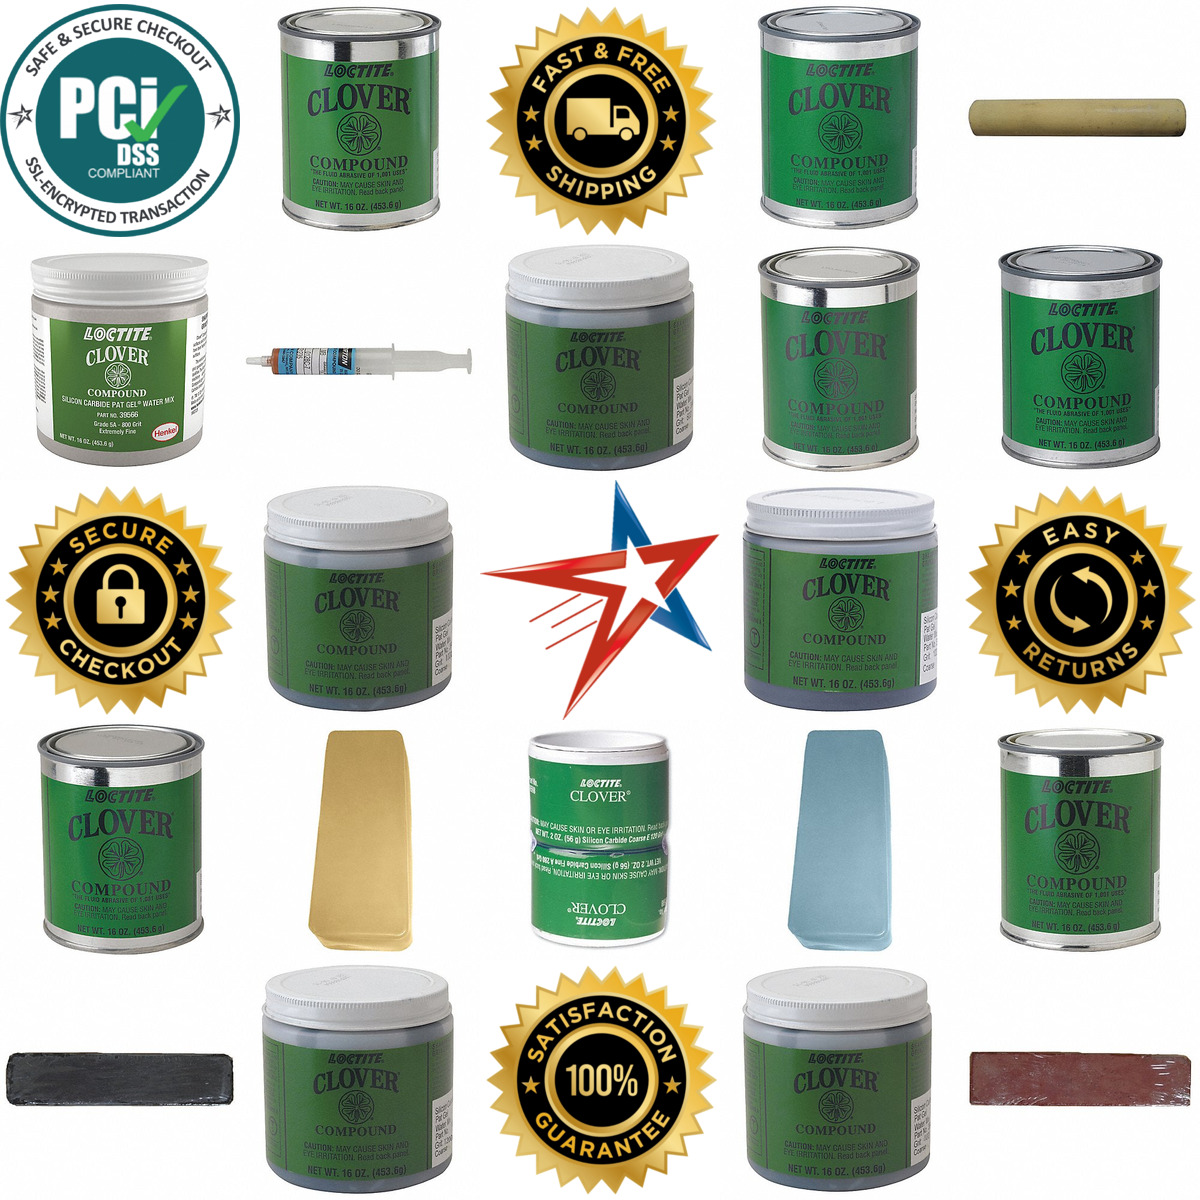 A selection of Buffing and Polishing Compounds products on GoVets